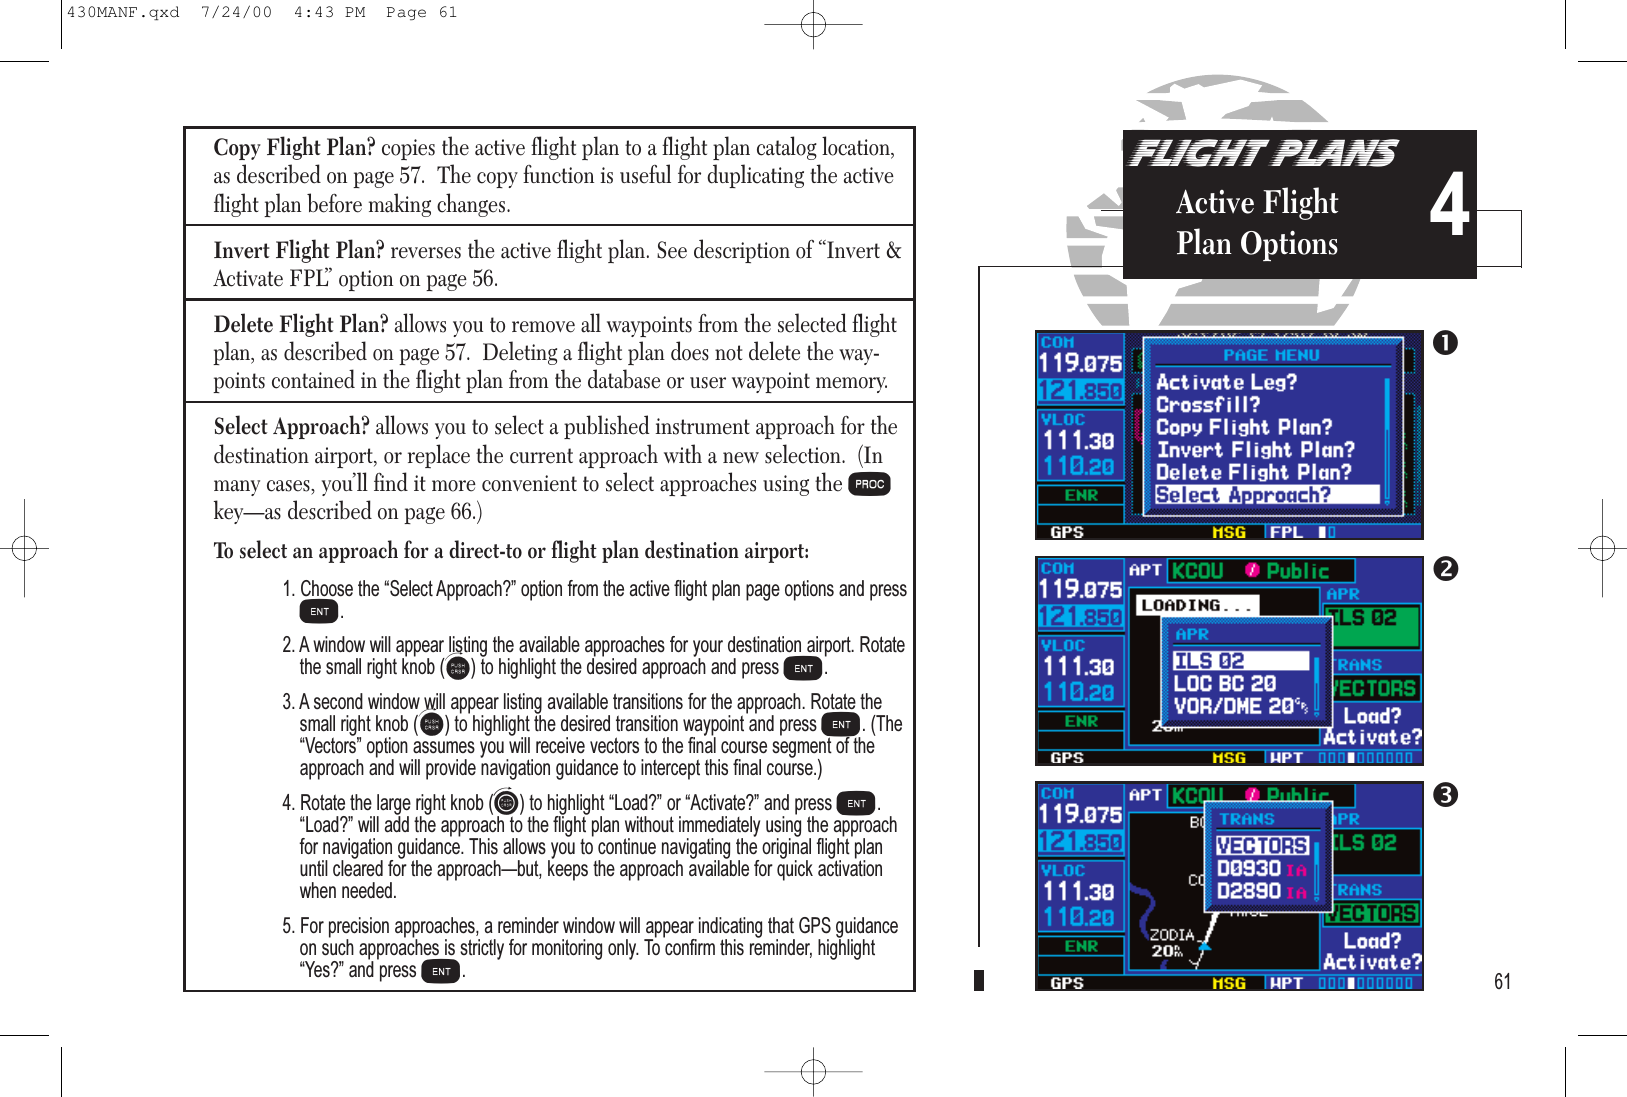 Copy Flight Plan? copies the active flight plan to a flight plan catalog location,as described on page 57.  The copy function is useful for duplicating the activeflight plan before making changes.Invert Flight Plan? reverses the active flight plan. See description of “Invert &amp;Activate FPL” option on page 56.Delete Flight Plan?allows you to remove all waypoints from the selected flightplan, as described on page 57.  Deleting a flight plan does not delete the way-points contained in the flight plan from the database or user waypoint memory.Select Approach? allows you to select a published instrument approach for thedestination airport, or replace the current approach with a new selection.  (Inmany cases, you’ll find it more convenient to select approaches using the Pkey—as described on page 66.)To select an approach for a direct-to or flight plan destination airport:1. Choose the Select Approach? option from the active flight plan page options and pressE.2. A window will appear listing the available approaches for your destination airport. Rotatethe small right knob (a) to highlight the desired approach and press E.3. A second window will appear listing available transitions for the approach. Rotate thesmall right knob (a) to highlight the desired transition waypoint and press E. (TheVectors option assumes you will receive vectors to the final course segment of theapproach and will provide navigation guidance to intercept this final course.)4. Rotate the large right knob (d) to highlight Load? or Activate? and press E.Load? will add the approach to the flight plan without immediately using the approachfor navigation guidance. This allows you to continue navigating the original flight planuntil cleared for the approachbut, keeps the approach available for quick activationwhen needed. 5. For precision approaches, a reminder window will appear indicating that GPS guidanceon such approaches is strictly for monitoring only. To confirm this reminder, highlightYes? and press E.FLIGHT PLANSActive FlightPlan Options 461430MANF.qxd  7/24/00  4:43 PM  Page 61